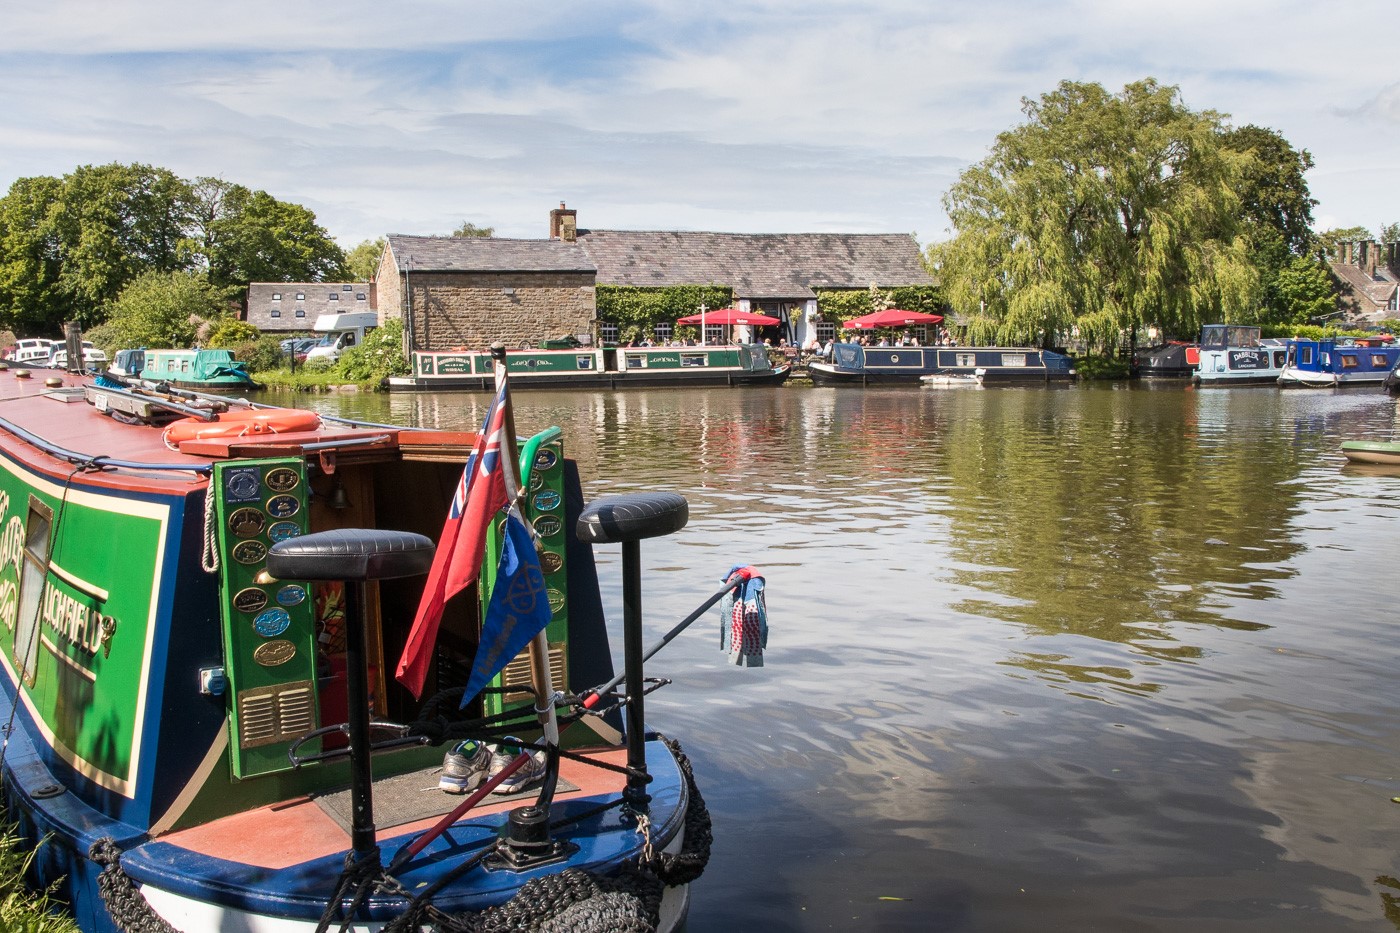 Lancaster canal - narrow boat on the water